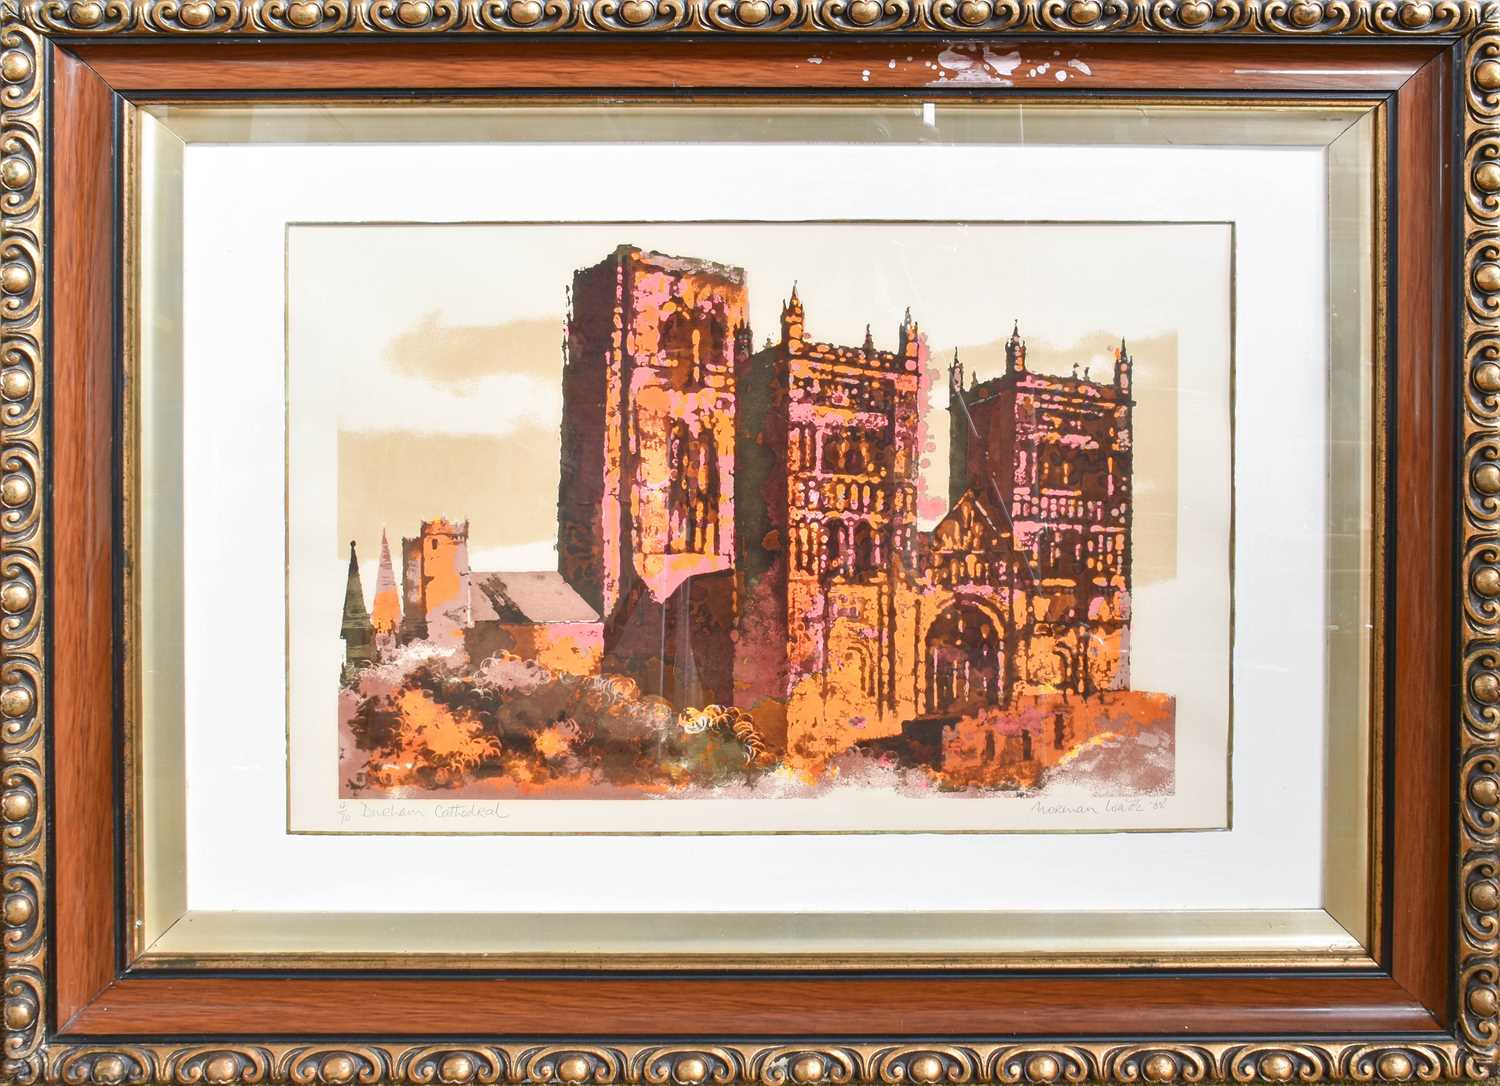 Norman Wade (20th Century) "Durham Cathedral" Signed and dated (19)68, inscribed and numbered 4/ - Image 2 of 2